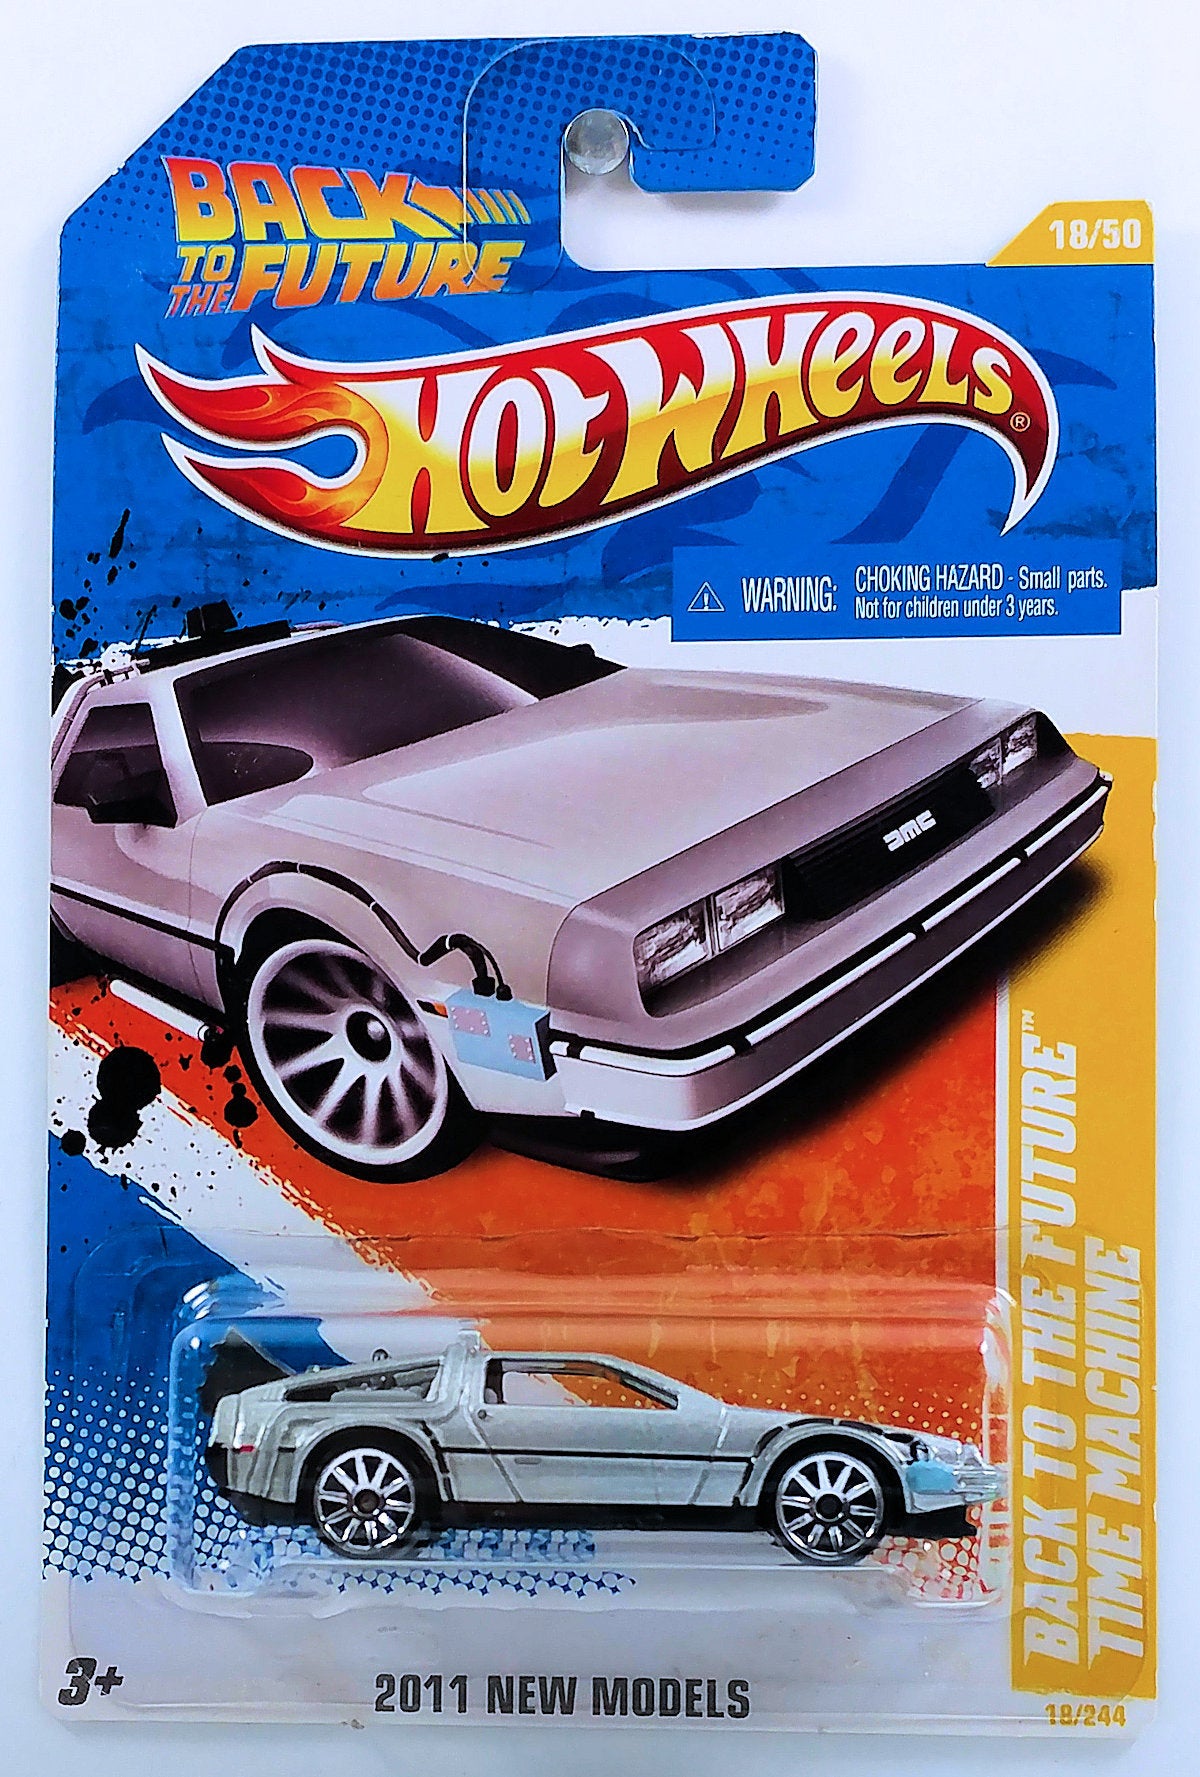 Hot Wheels 2011 - Collector # 018/244 - New Models 18/50 - Back To The Future Time Machine - Silver - USA Card - ERROR No Windows!